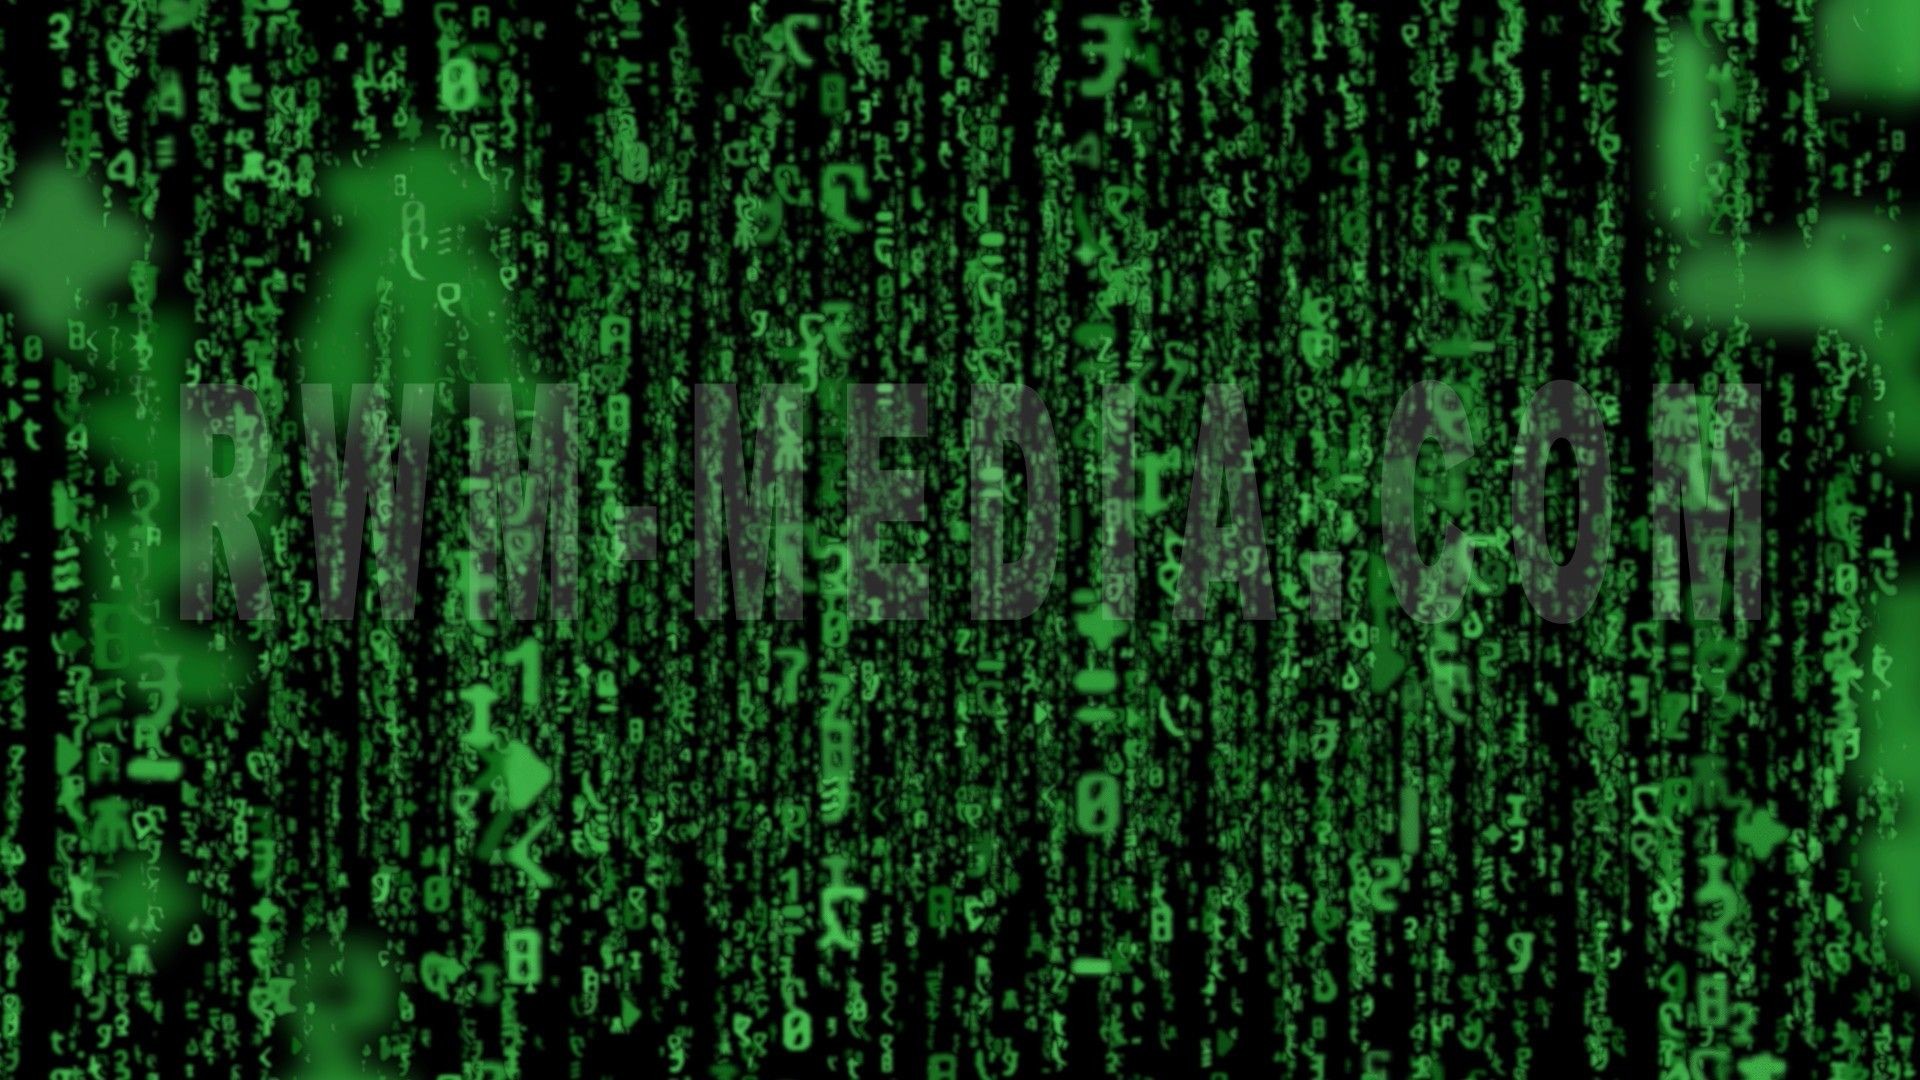 1920x1080 Code the matrix green movies wallpapers desktop and mobile jpg  Moving  matrix wallpapers green